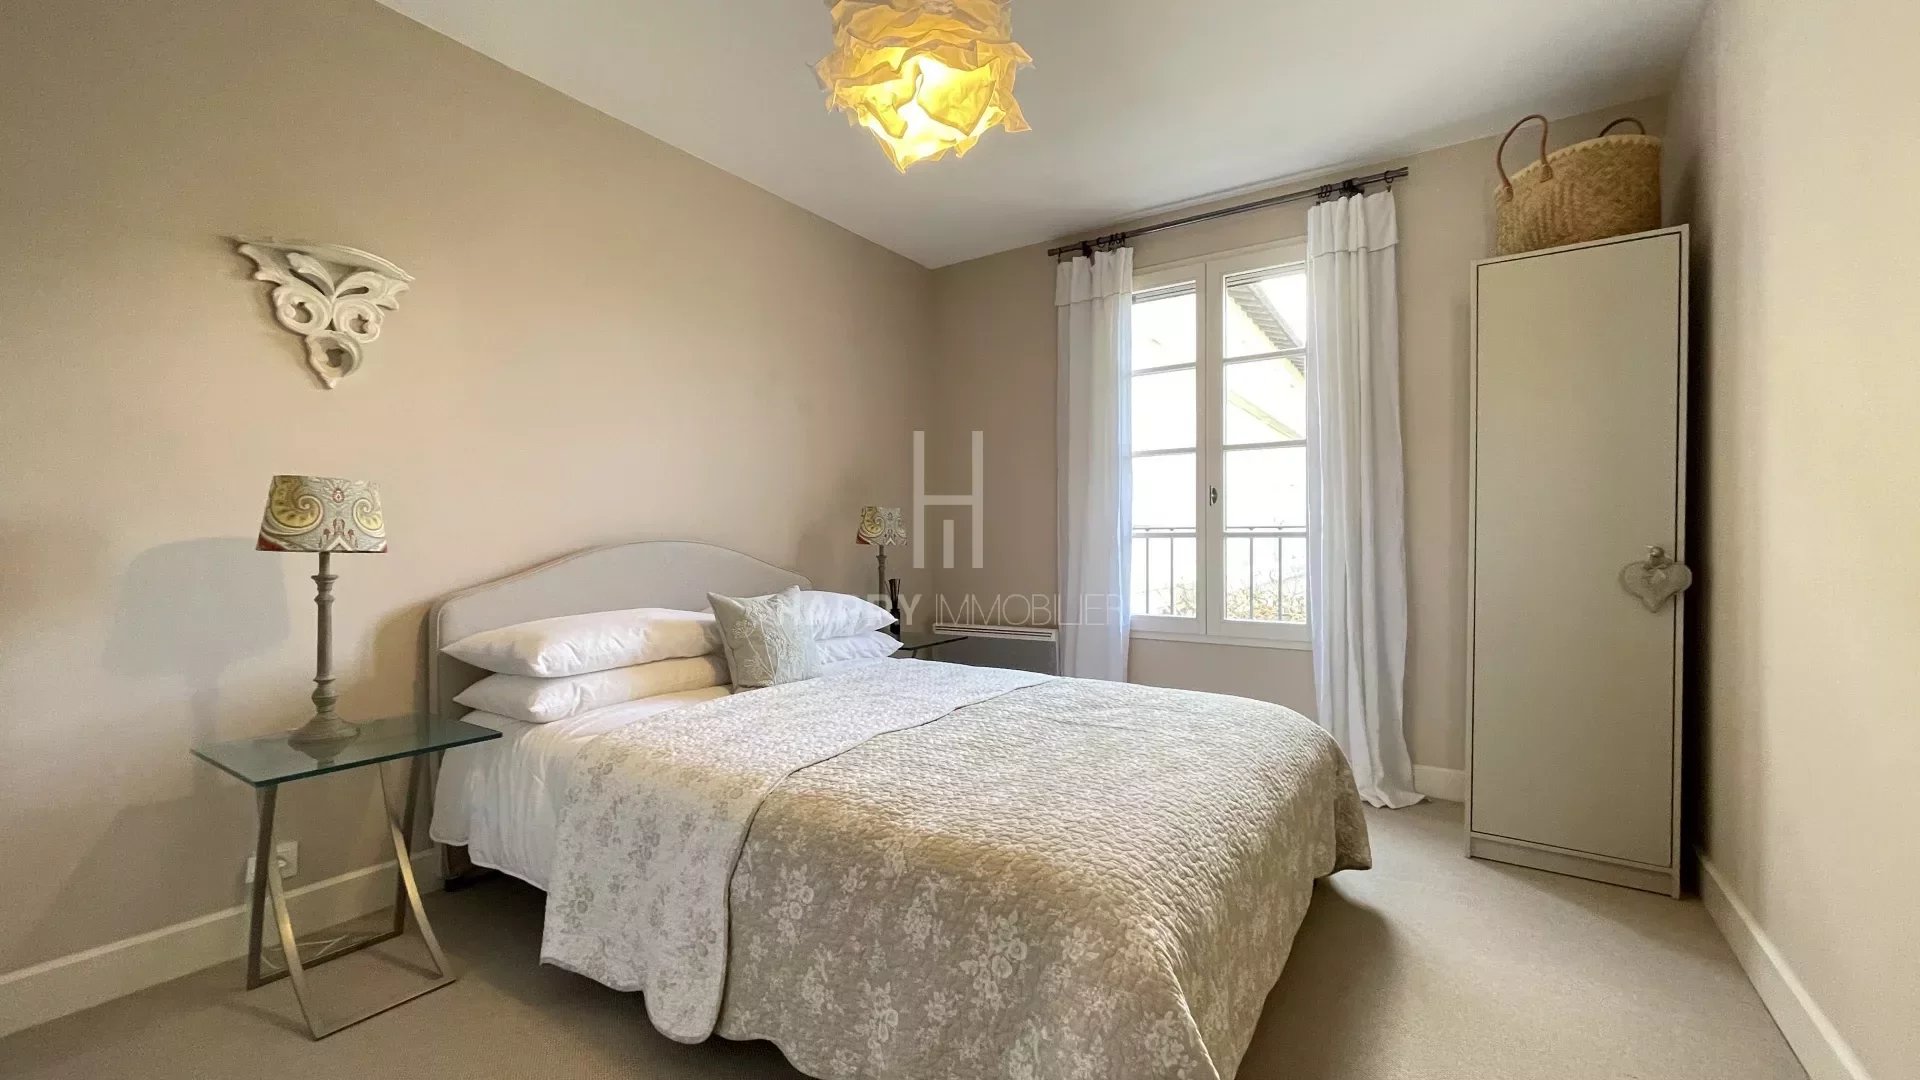 High standing for this villa in the village center of St Rémy de Provence ​